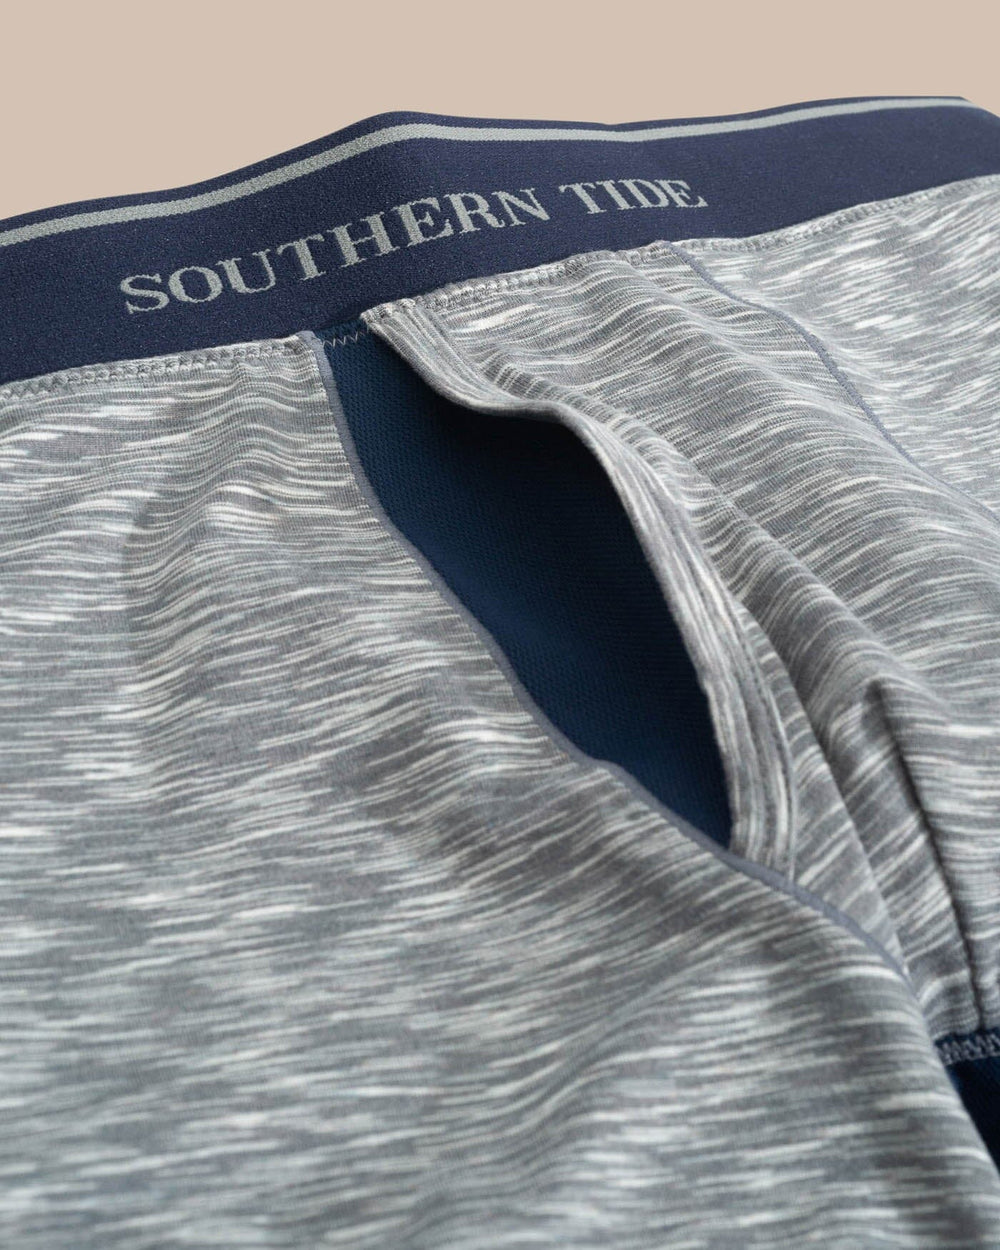 The back of the Men's Baxter Boxer Brief by Southern Tide - Smoked Pearl